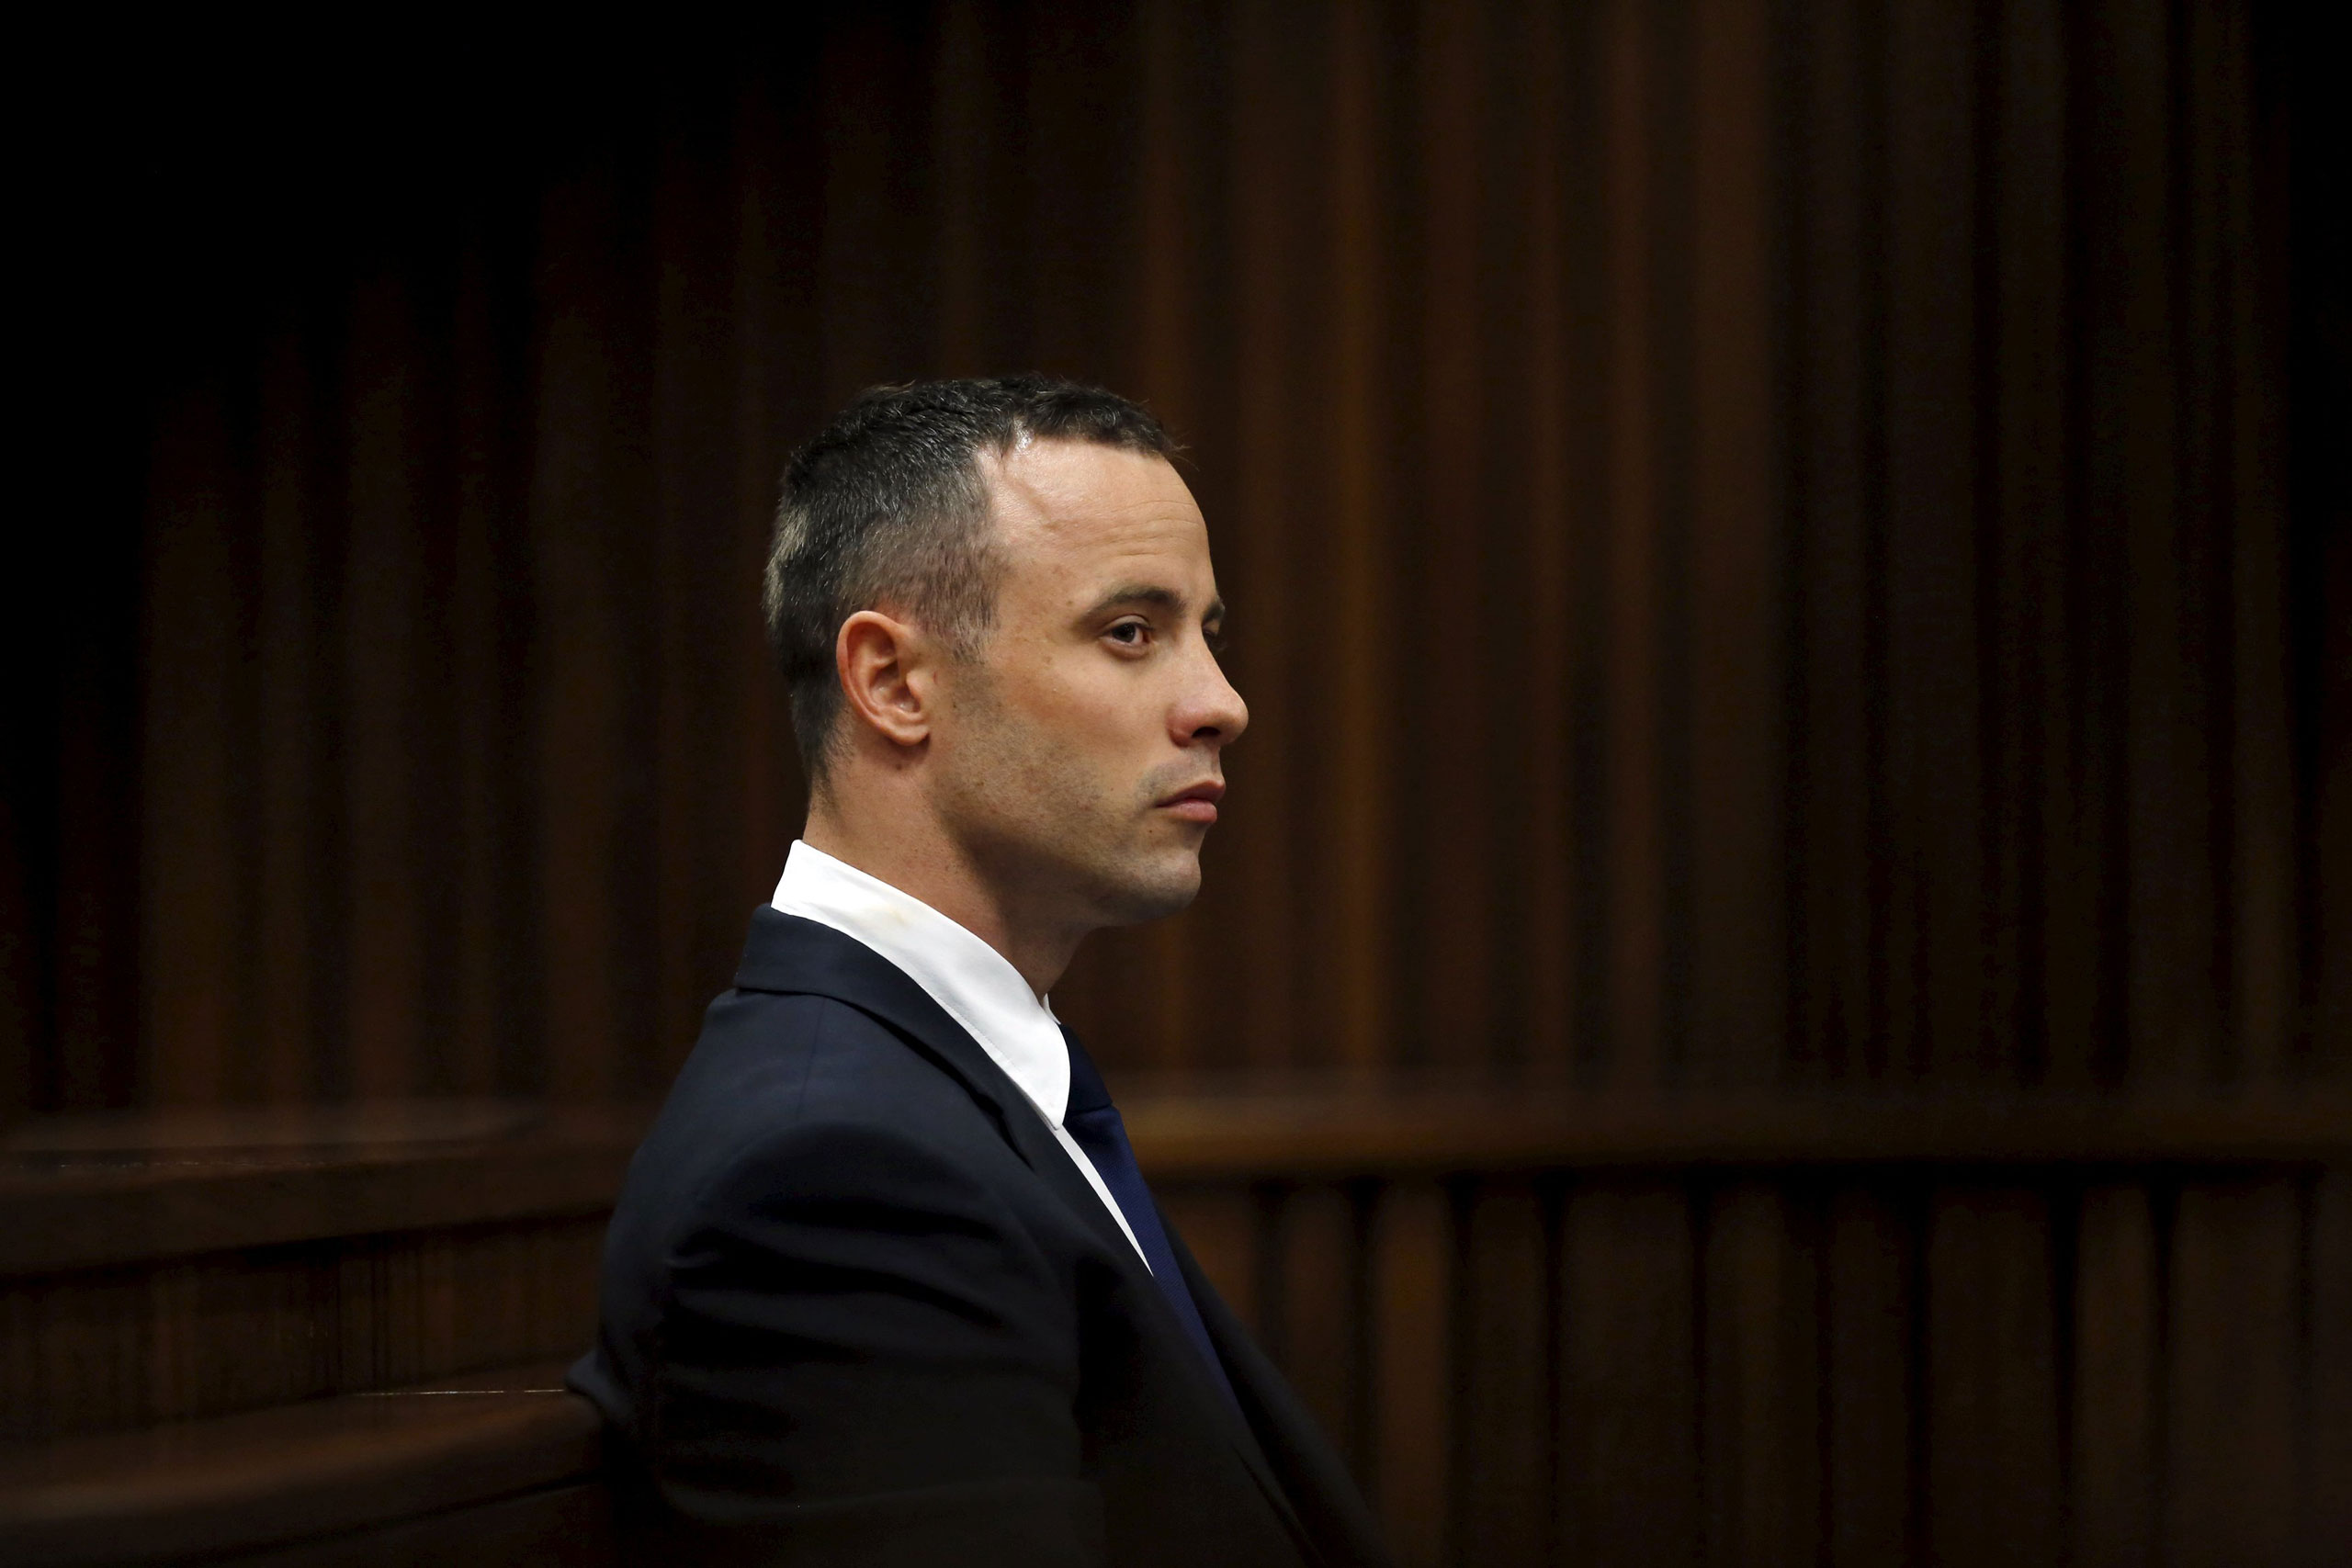 Oscar Pistorius  sits in the dock during his trial in the North Gauteng High Court in Pretoria, on May 6, 2014. (Mike Hutchings—Reuters)